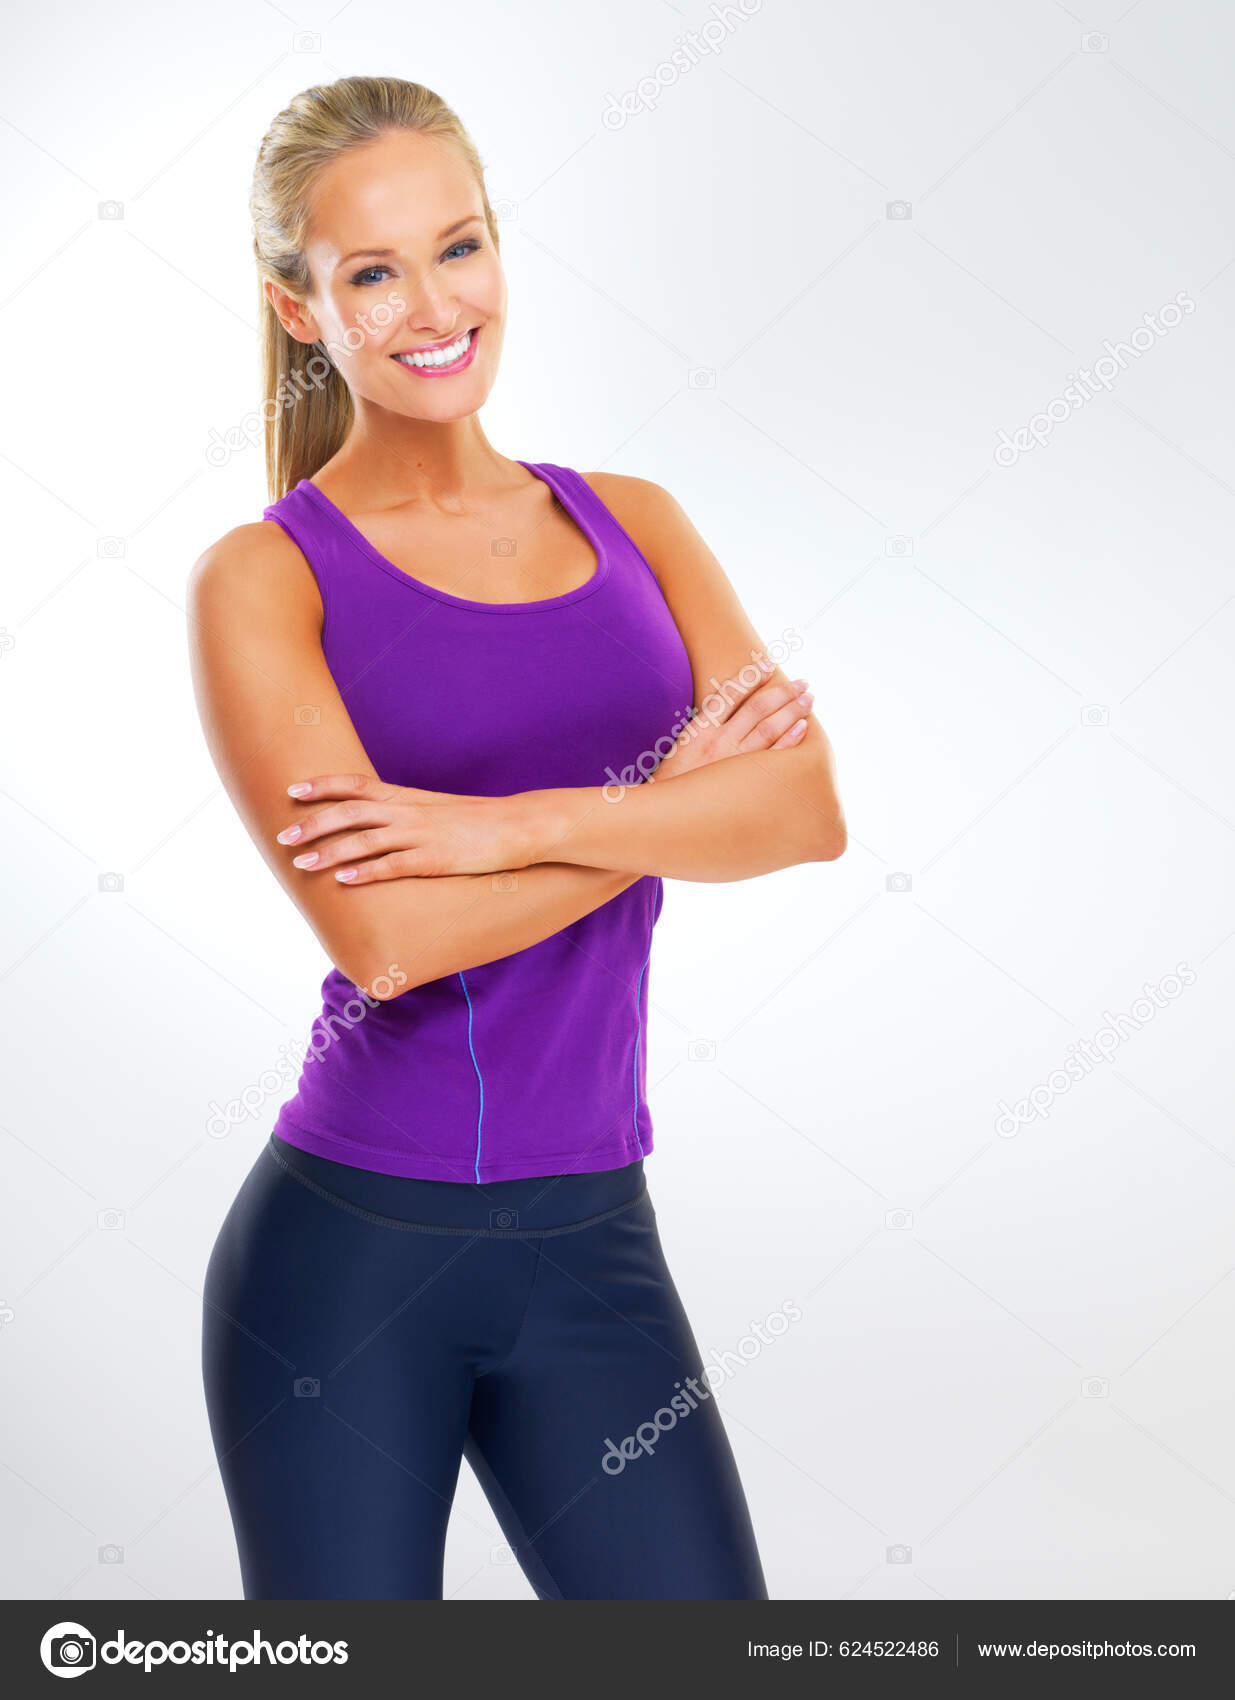 Looking Feeling Great Studio Shot Attractive Young Woman Exercise Clothing  Stock Photo by ©PeopleImages.com 624522486